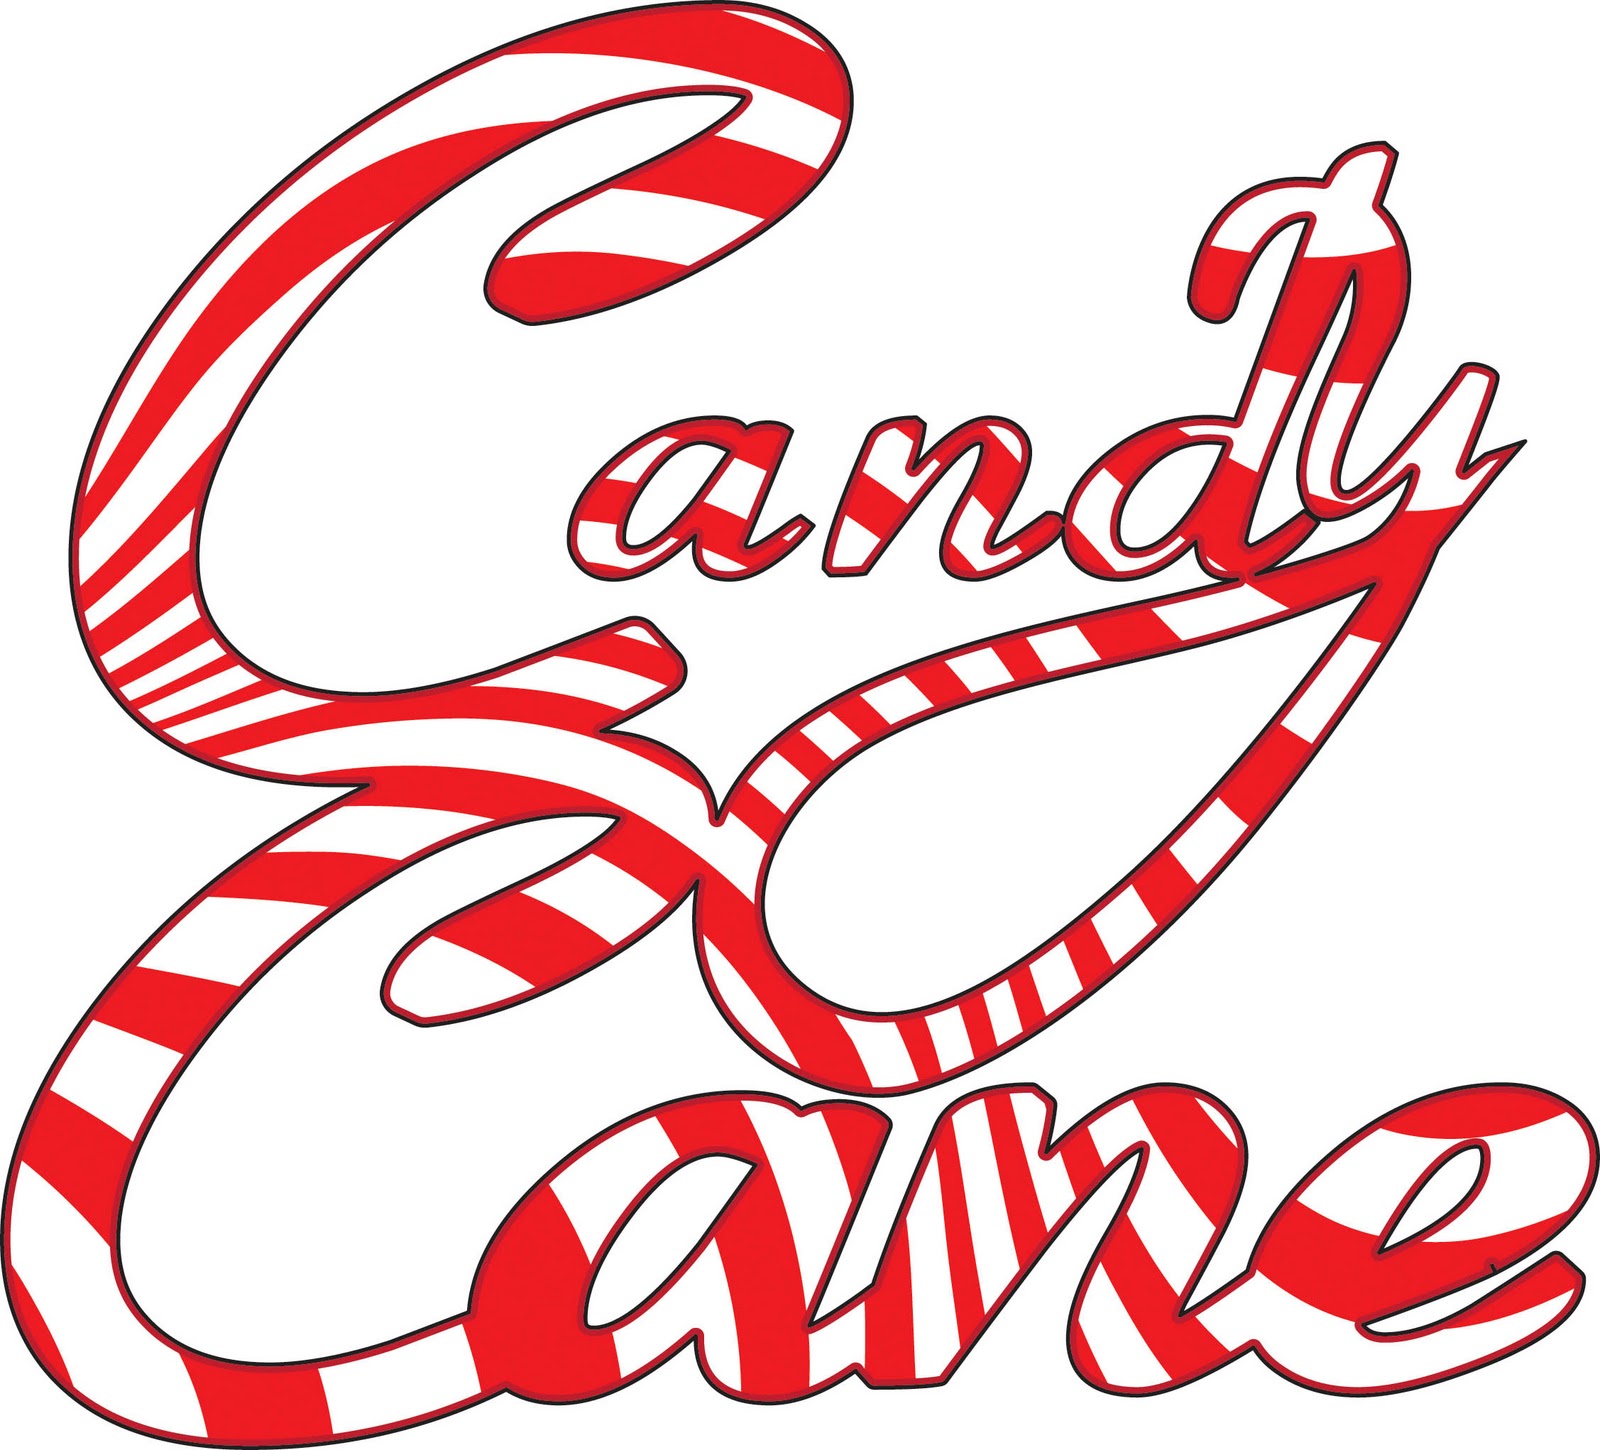 11 Candy Cane Clipart   Free Cliparts That You Can Download To You